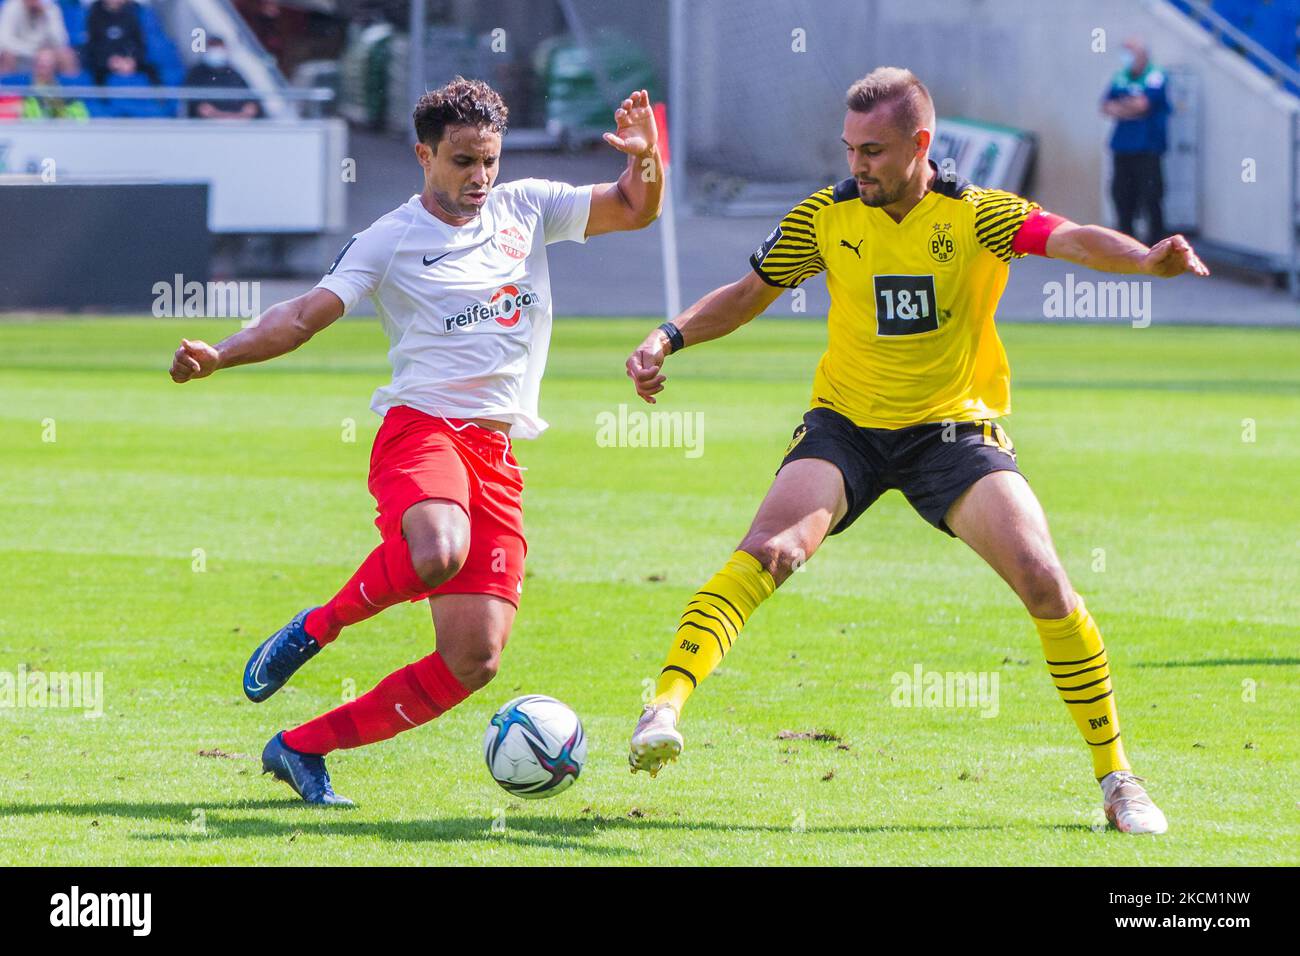 Franz Pfanne (right) of Borussia Dortmund II and Kianz Froese (left) of TSV Havelse battle for the ball during the 3. Liga match between TSV Havelse and Borussia Dortmund II at HDI-Arena on September 05, 2021 in Hanover, Germany. (Photo by Peter Niedung/NurPhoto) Stock Photo